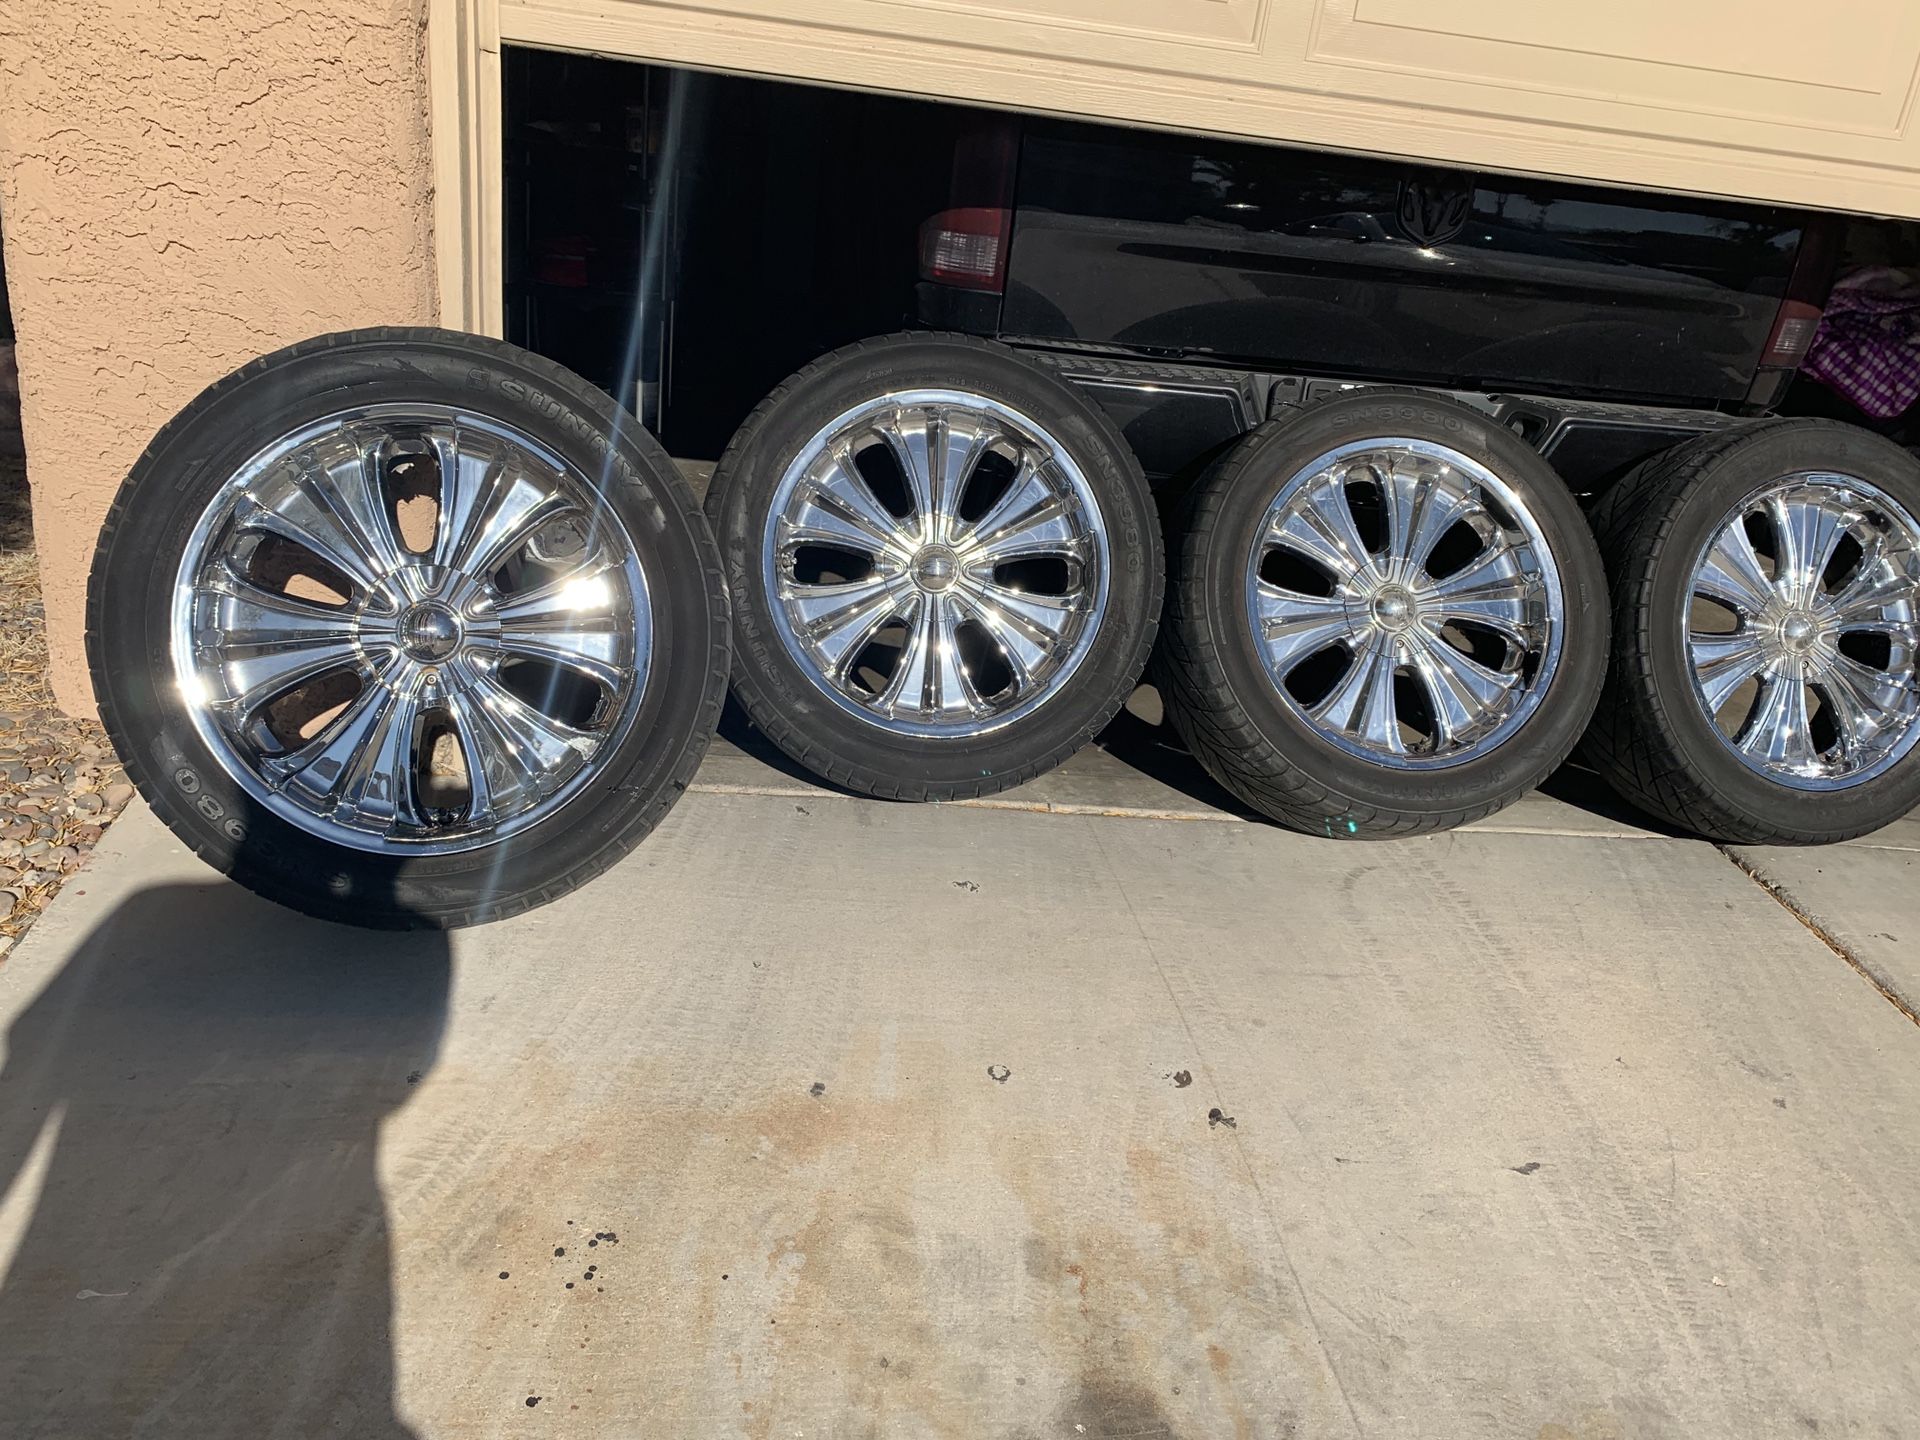 22” rims with tires